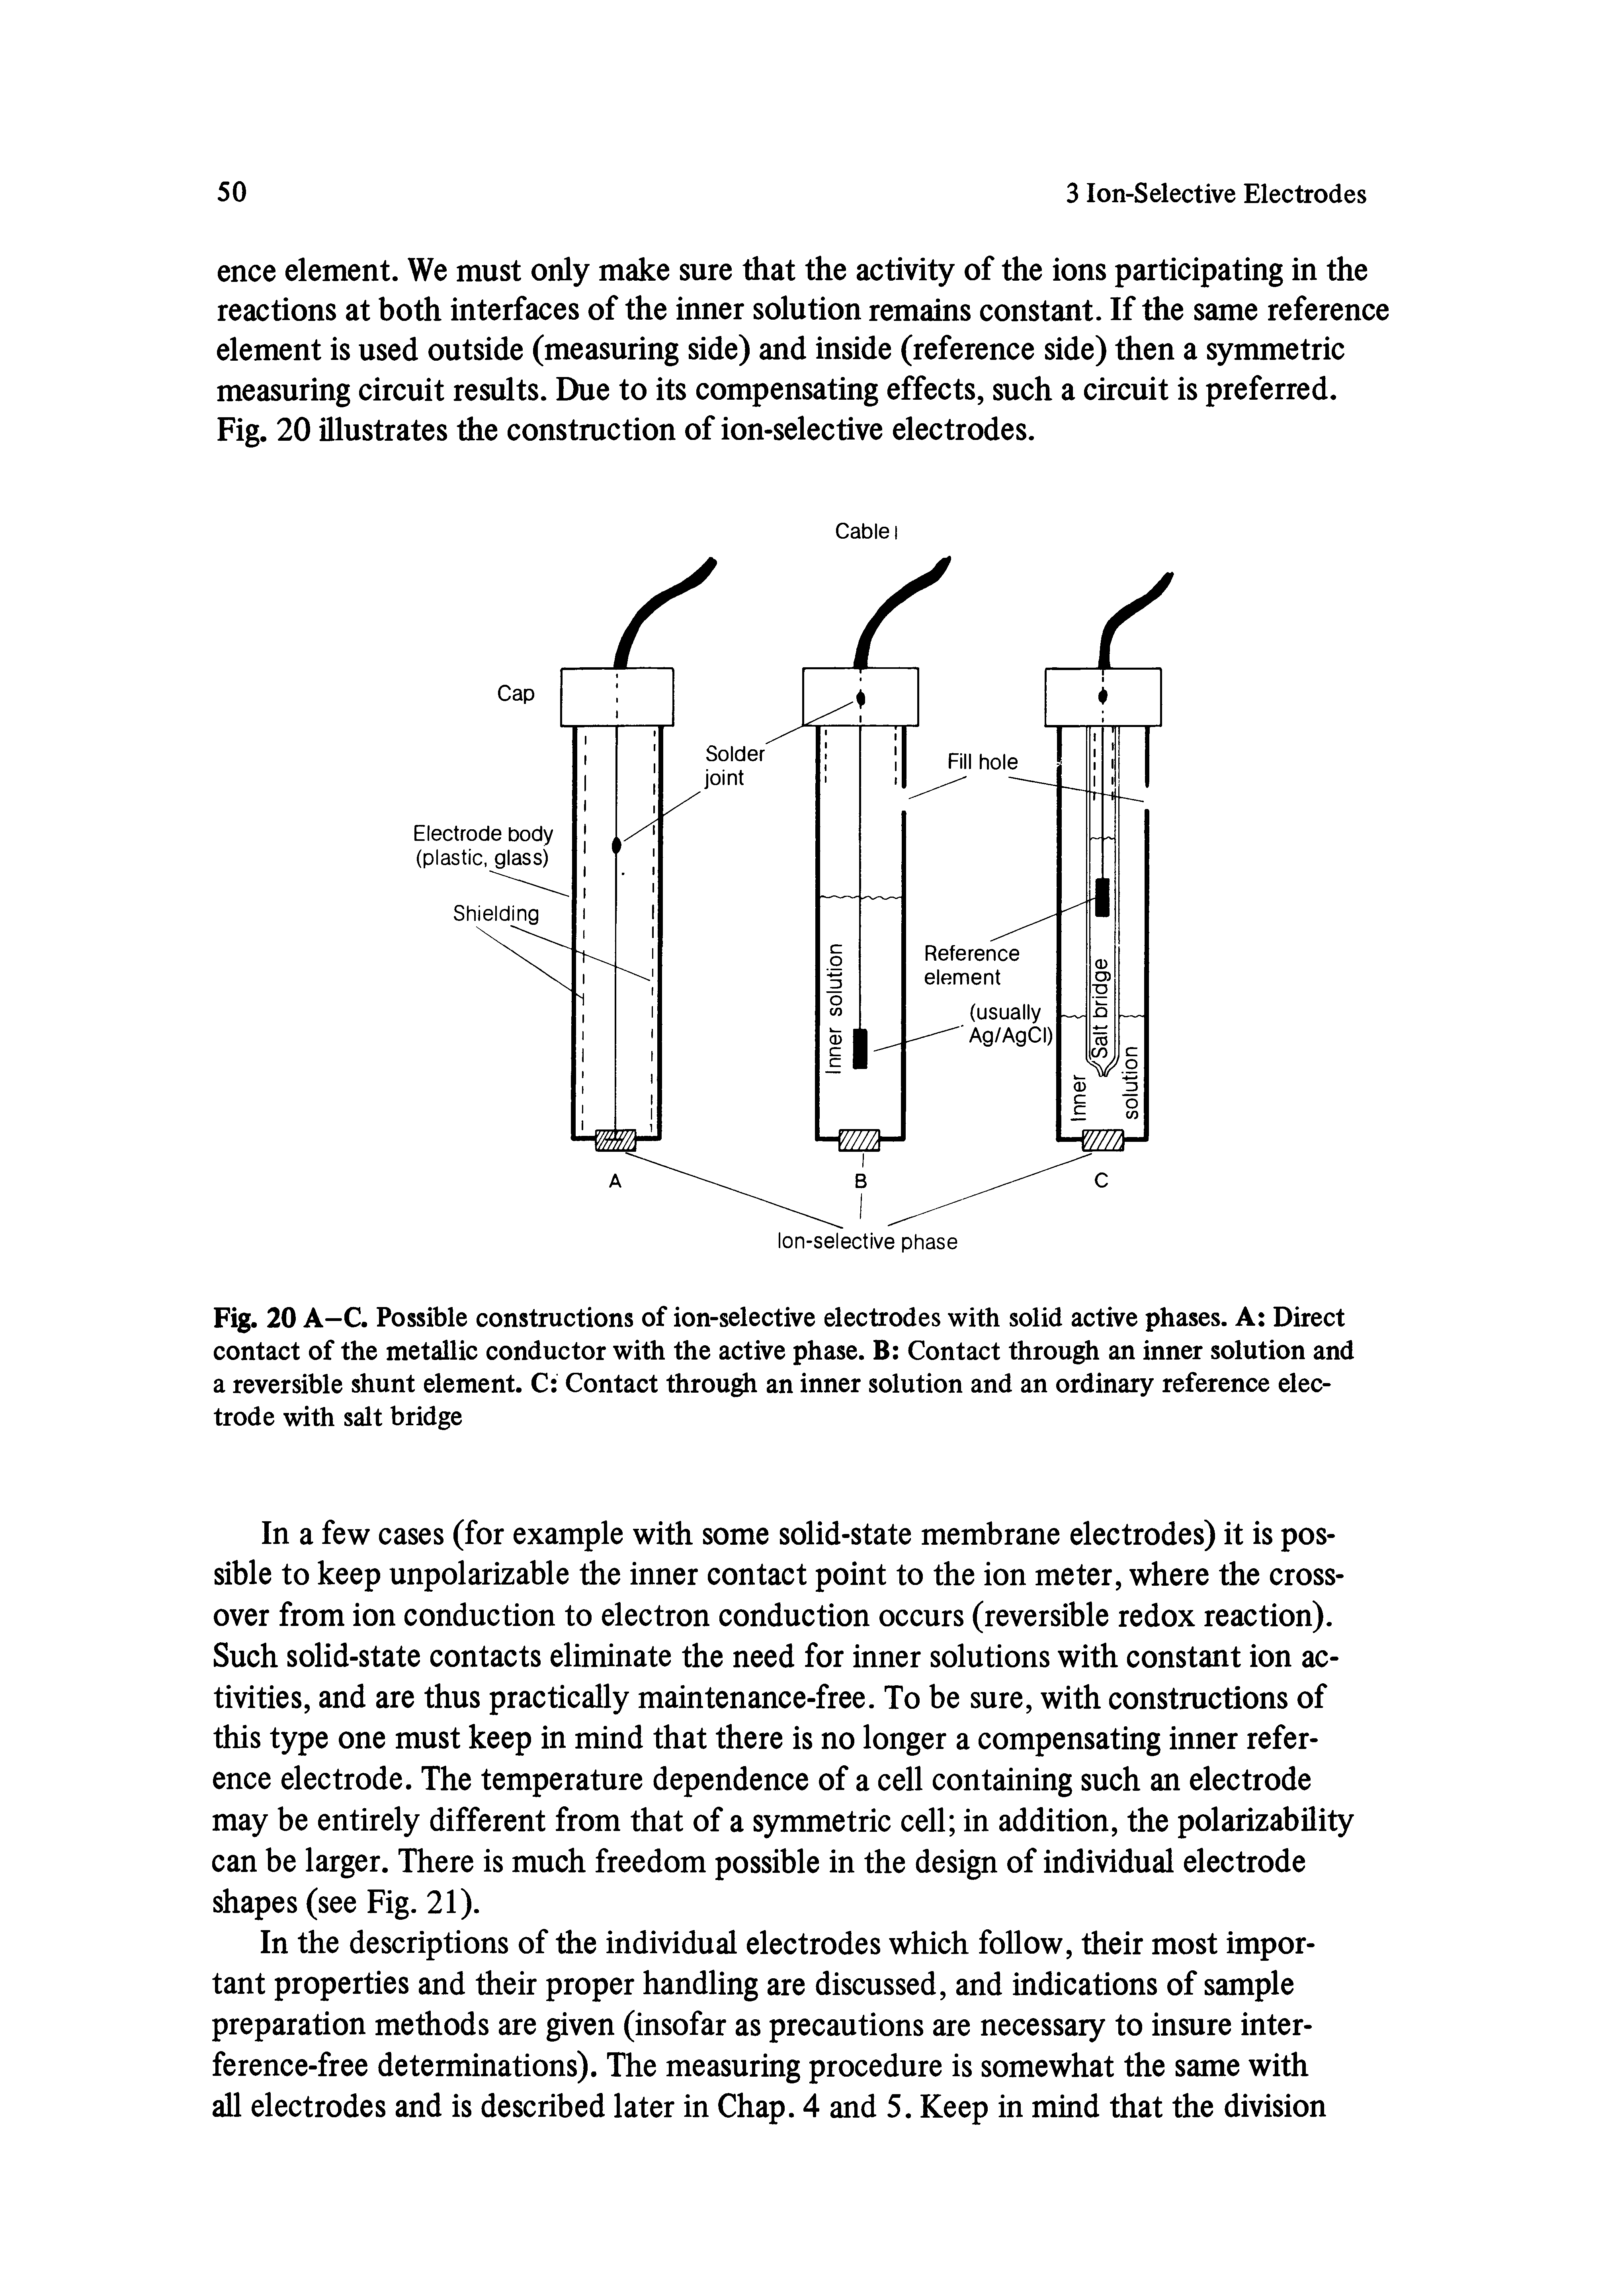 Fig. 20 A-C. Possible constructions of ion-selective electrodes with solid active phases. A Direct contact of the metallic conductor with the active phase. B Contact through an inner solution and a reversible shunt element. C Contact through an inner solution and an ordinary reference electrode with salt bridge...